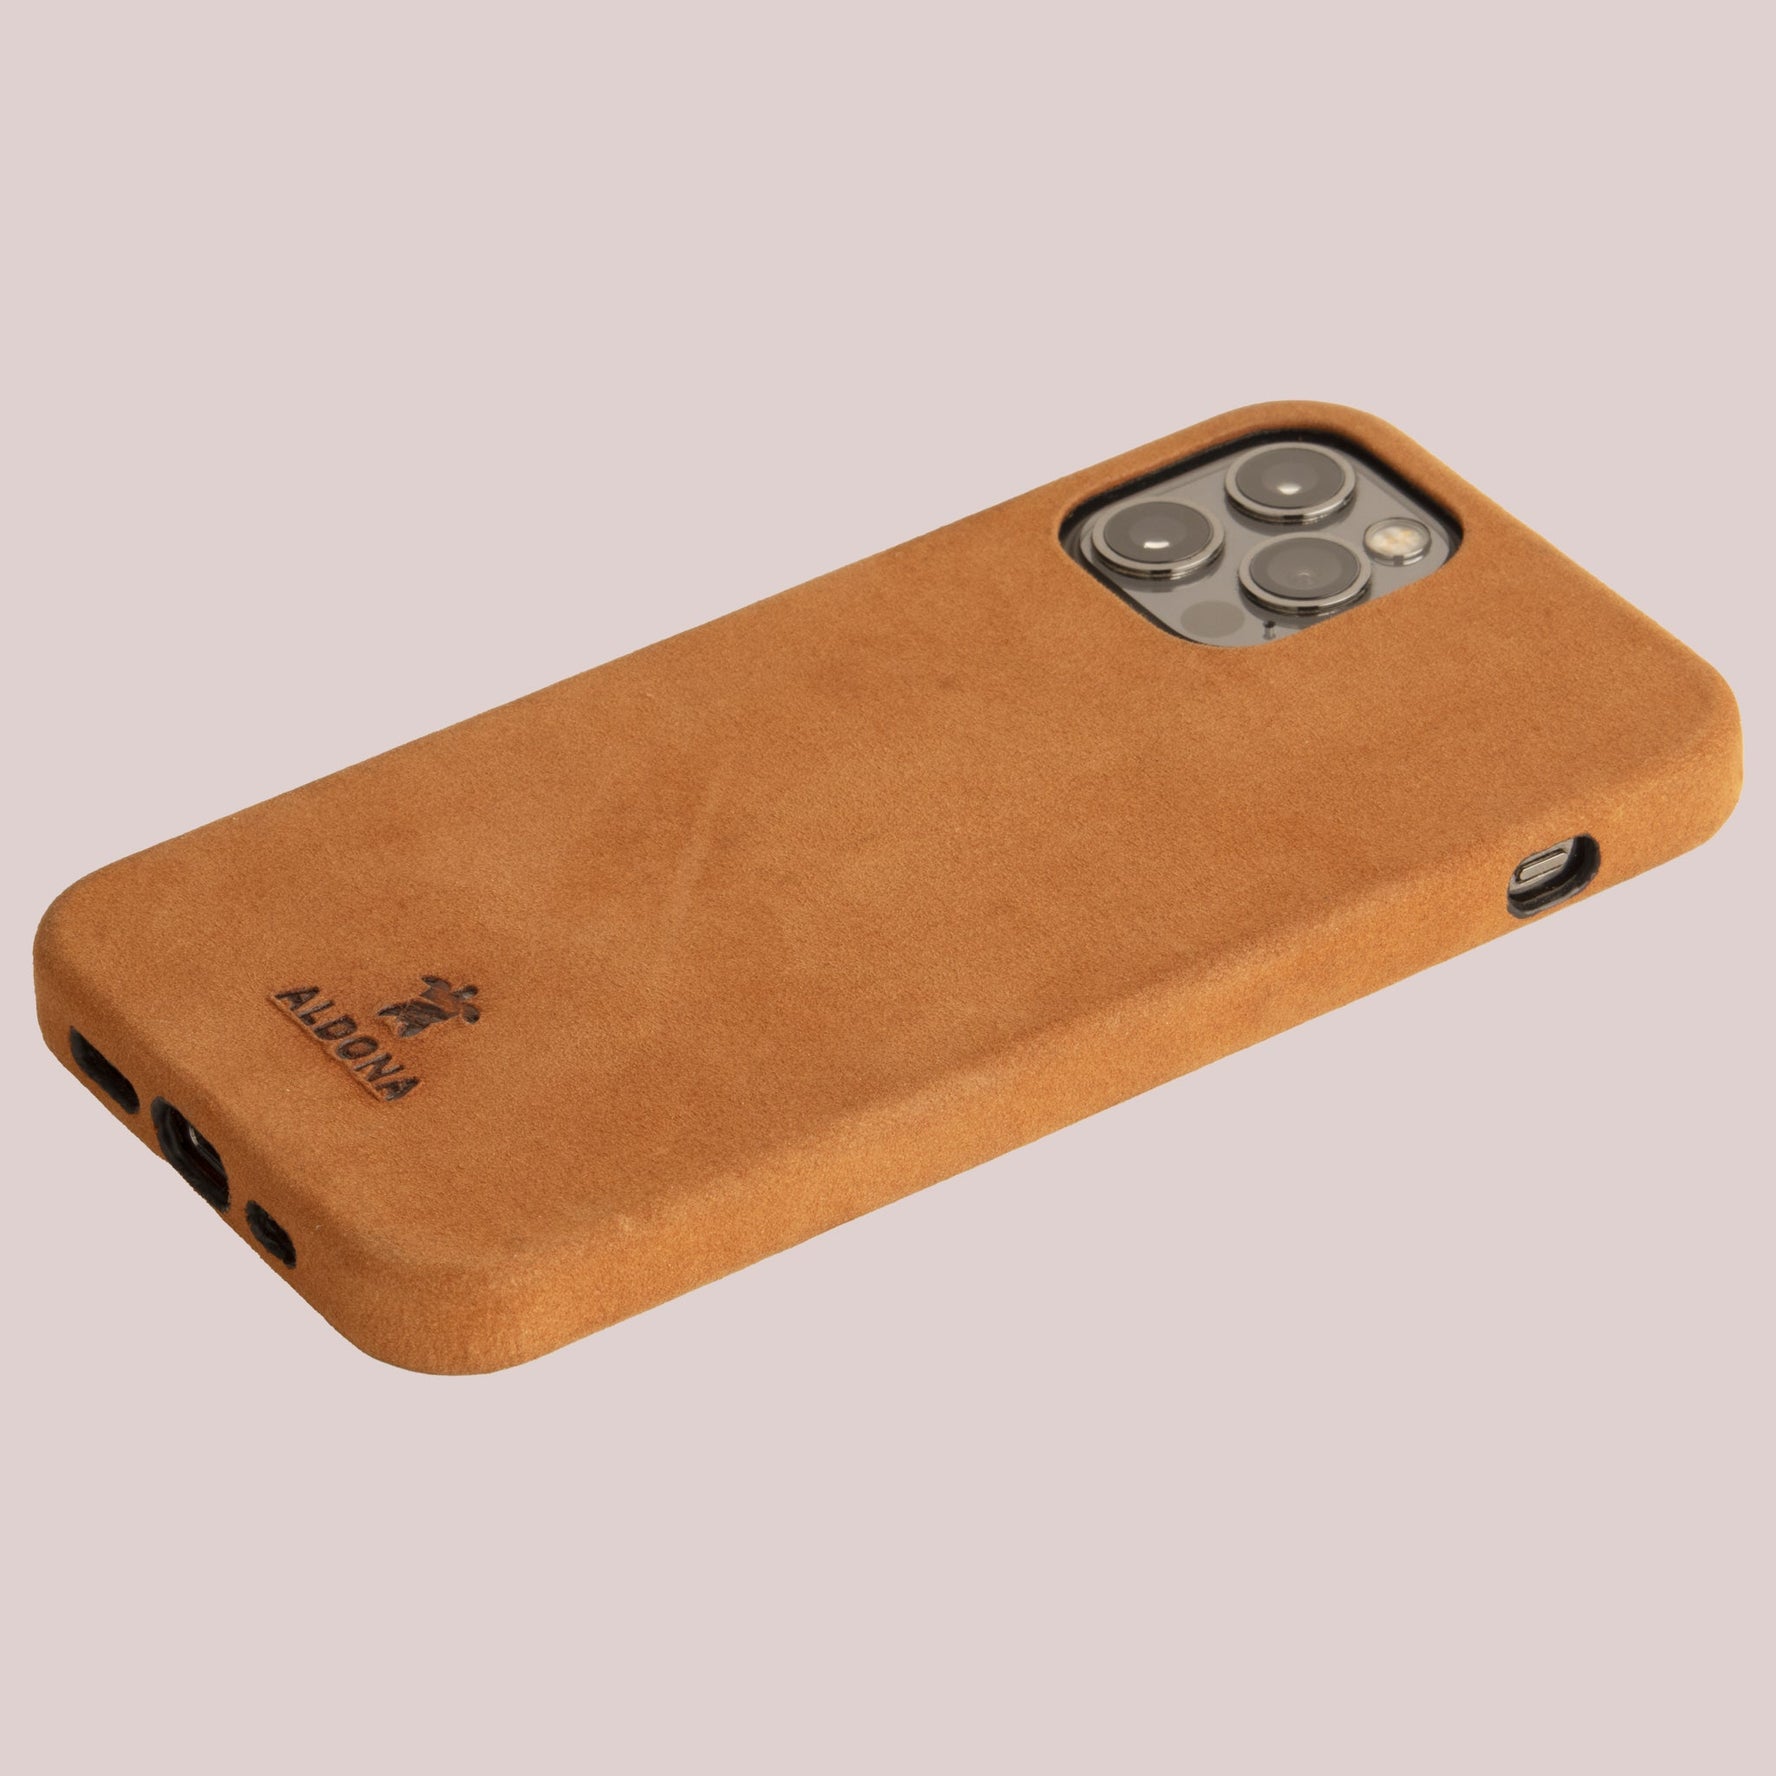 Kalon Case for iPhone 12 Mini with MagSafe Compatibility - Dark Soil